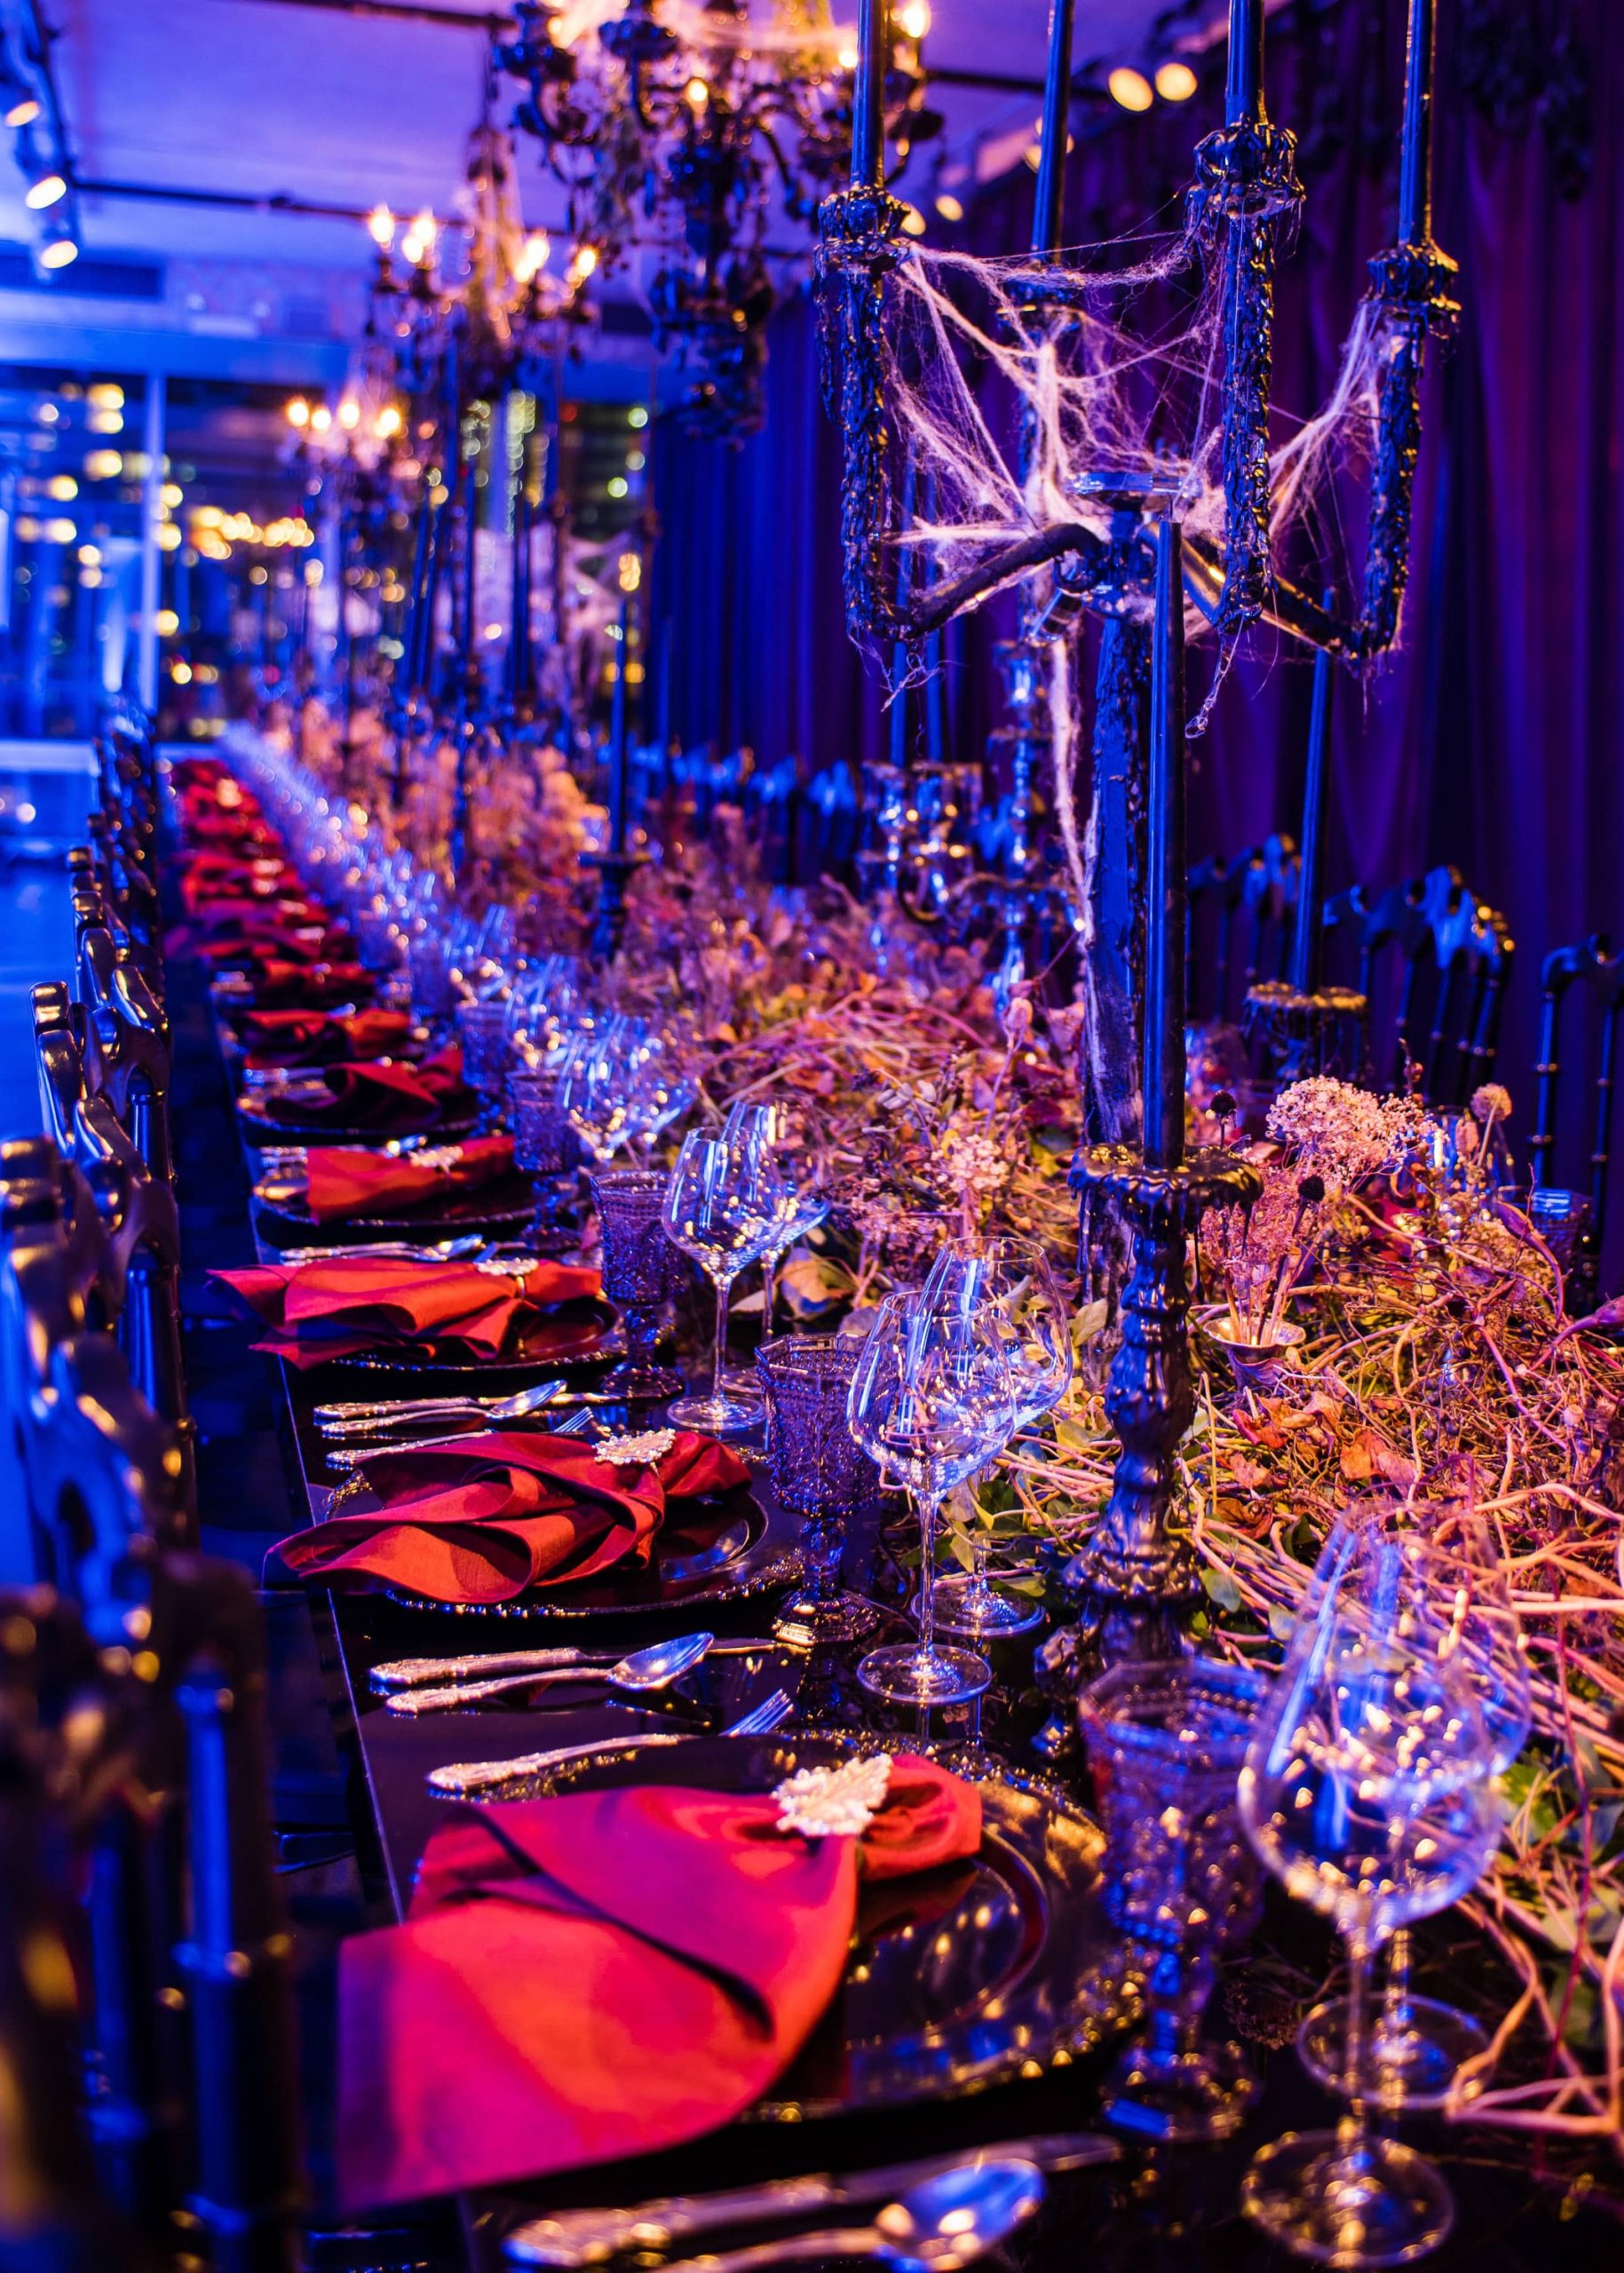 Halloween themed decor for the seated Monster Mash at this epic halloween party at The Standard in NYC | Photo by Gruber Photographers